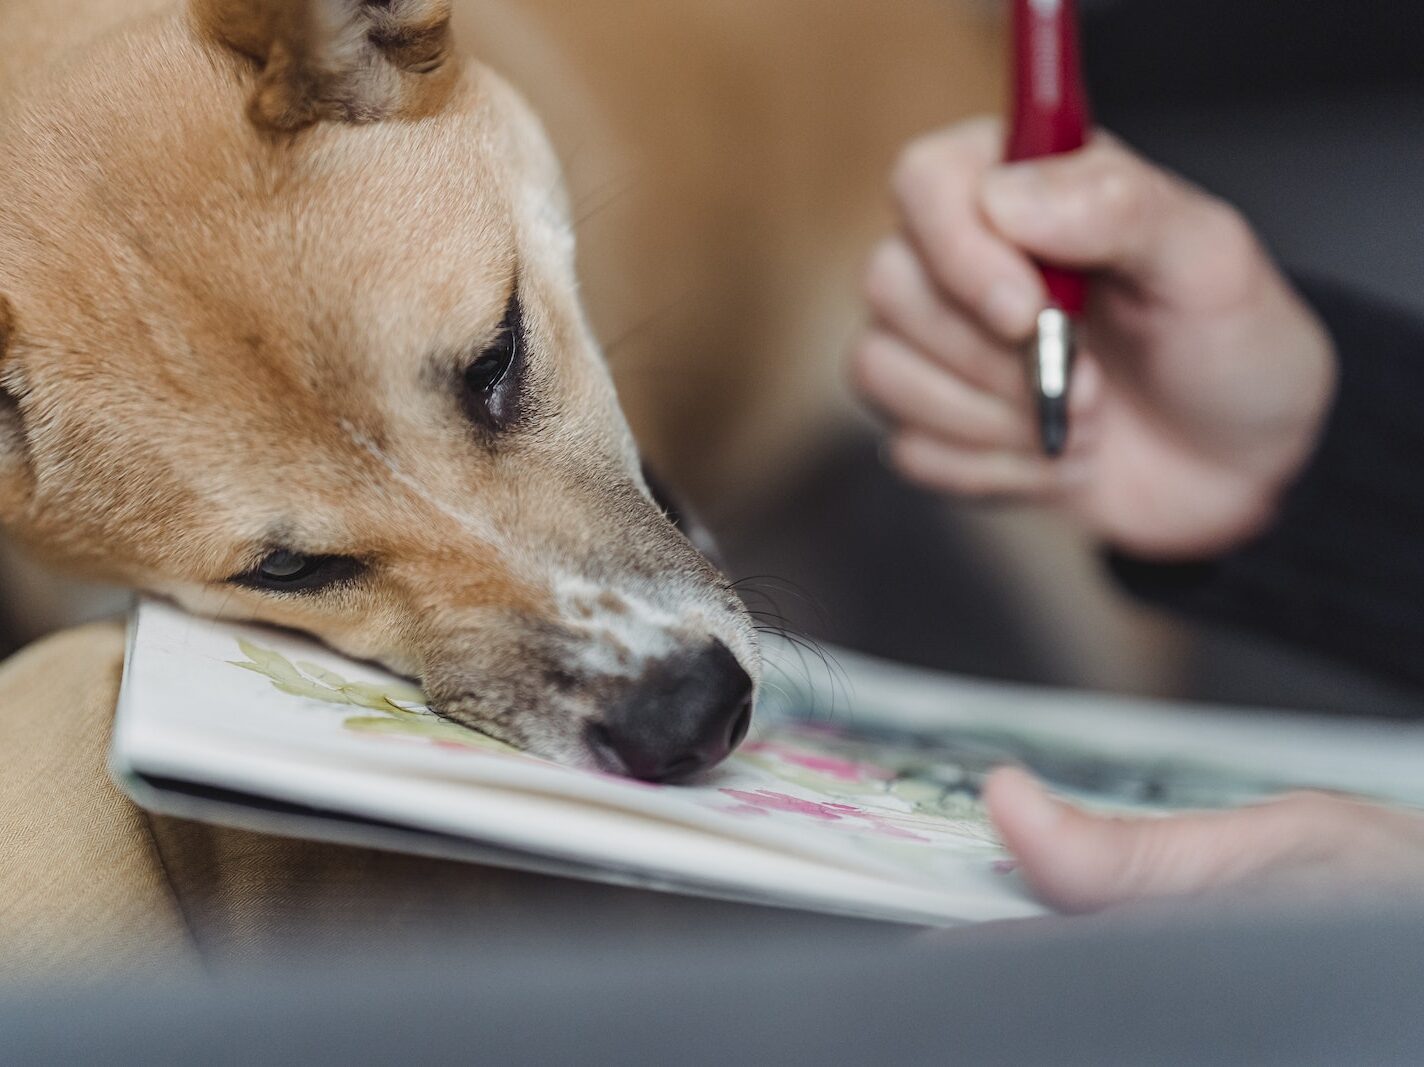 A Cute Brown Dog Leaning on an Artwork Painted in a Sketchpad